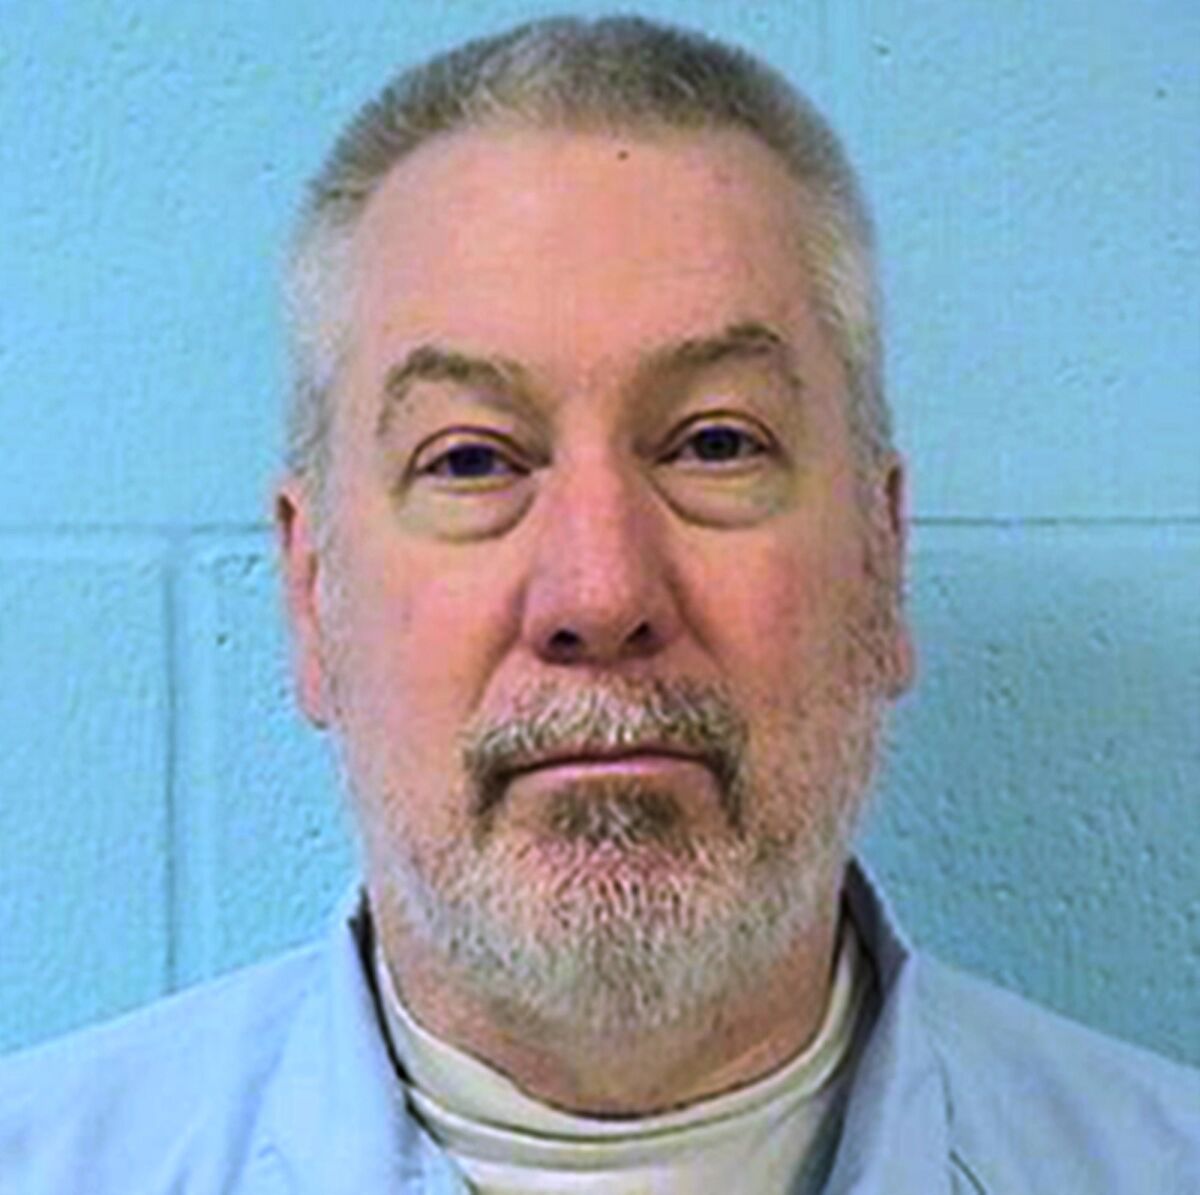 FILE - This undated file photo provided by the Illinois Department of Corrections shows former Bolingbrook, Ill., police officer Drew Peterson. A hearing on a motion seeking to dismiss former Chicago-area police sergeant Peterson's 2012 conviction for killing his third wife has been delayed. The Will County Circuit Court Clerk's office says the hearing originally scheduled for this Friday, Jan. 20, 2022, will be held Feb. 7. (Illinois Department of Corrections via AP, File)